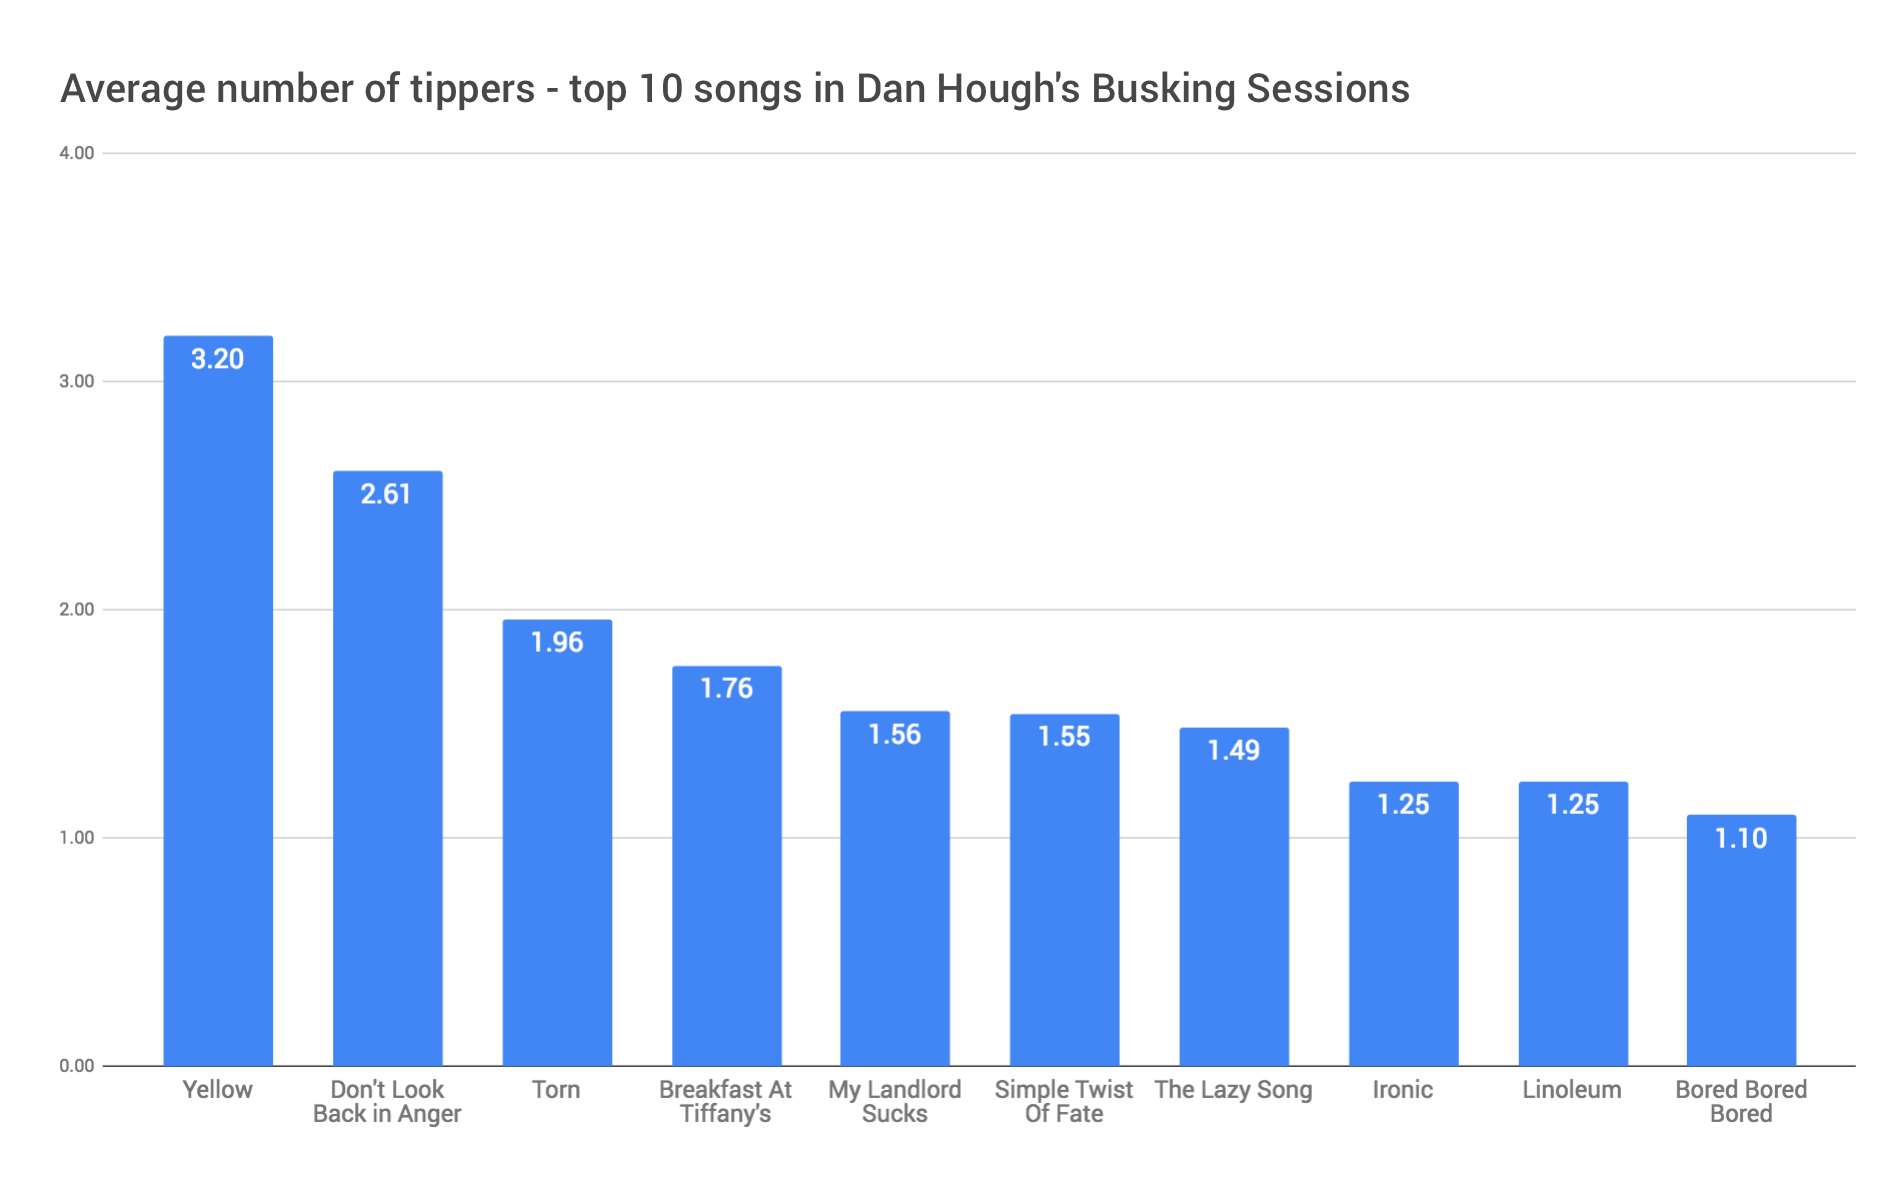 Amazingly, two original songs make this chart.